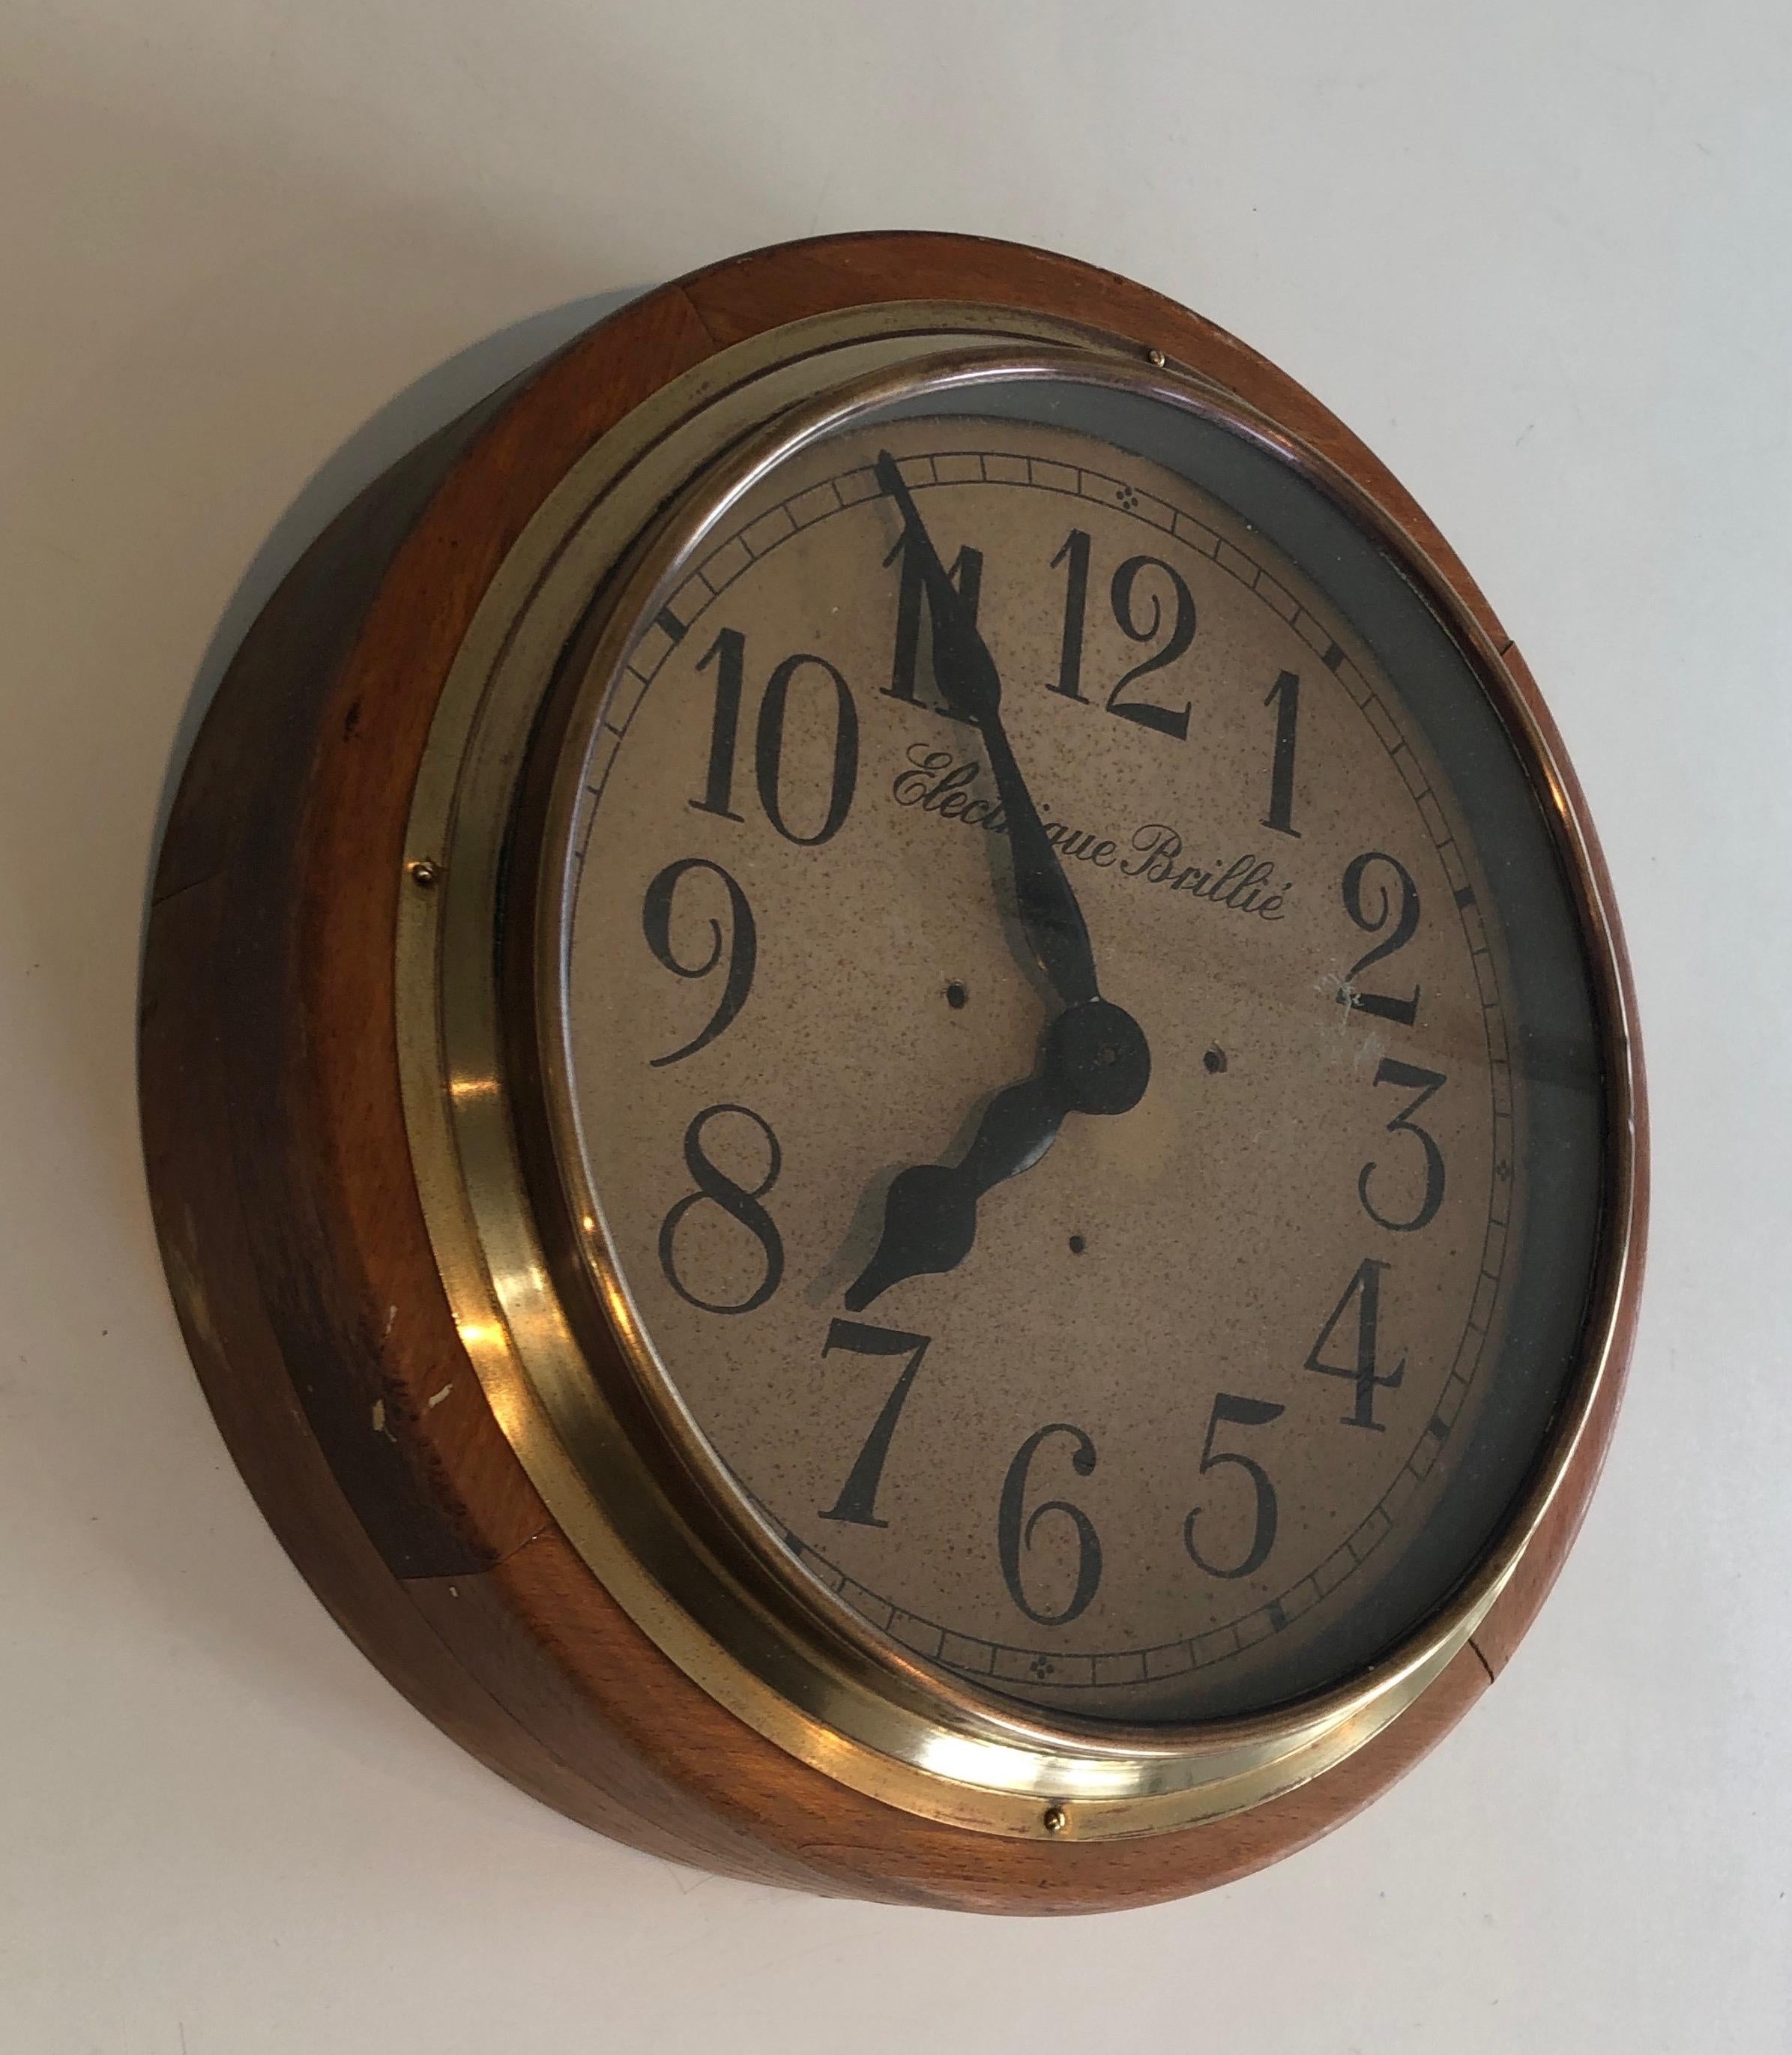 This nice decorative clock is made of wood, brass and metal. This is a model circa 1900 by famous French maker Brillé and the clock is signed Electrique Brillé.